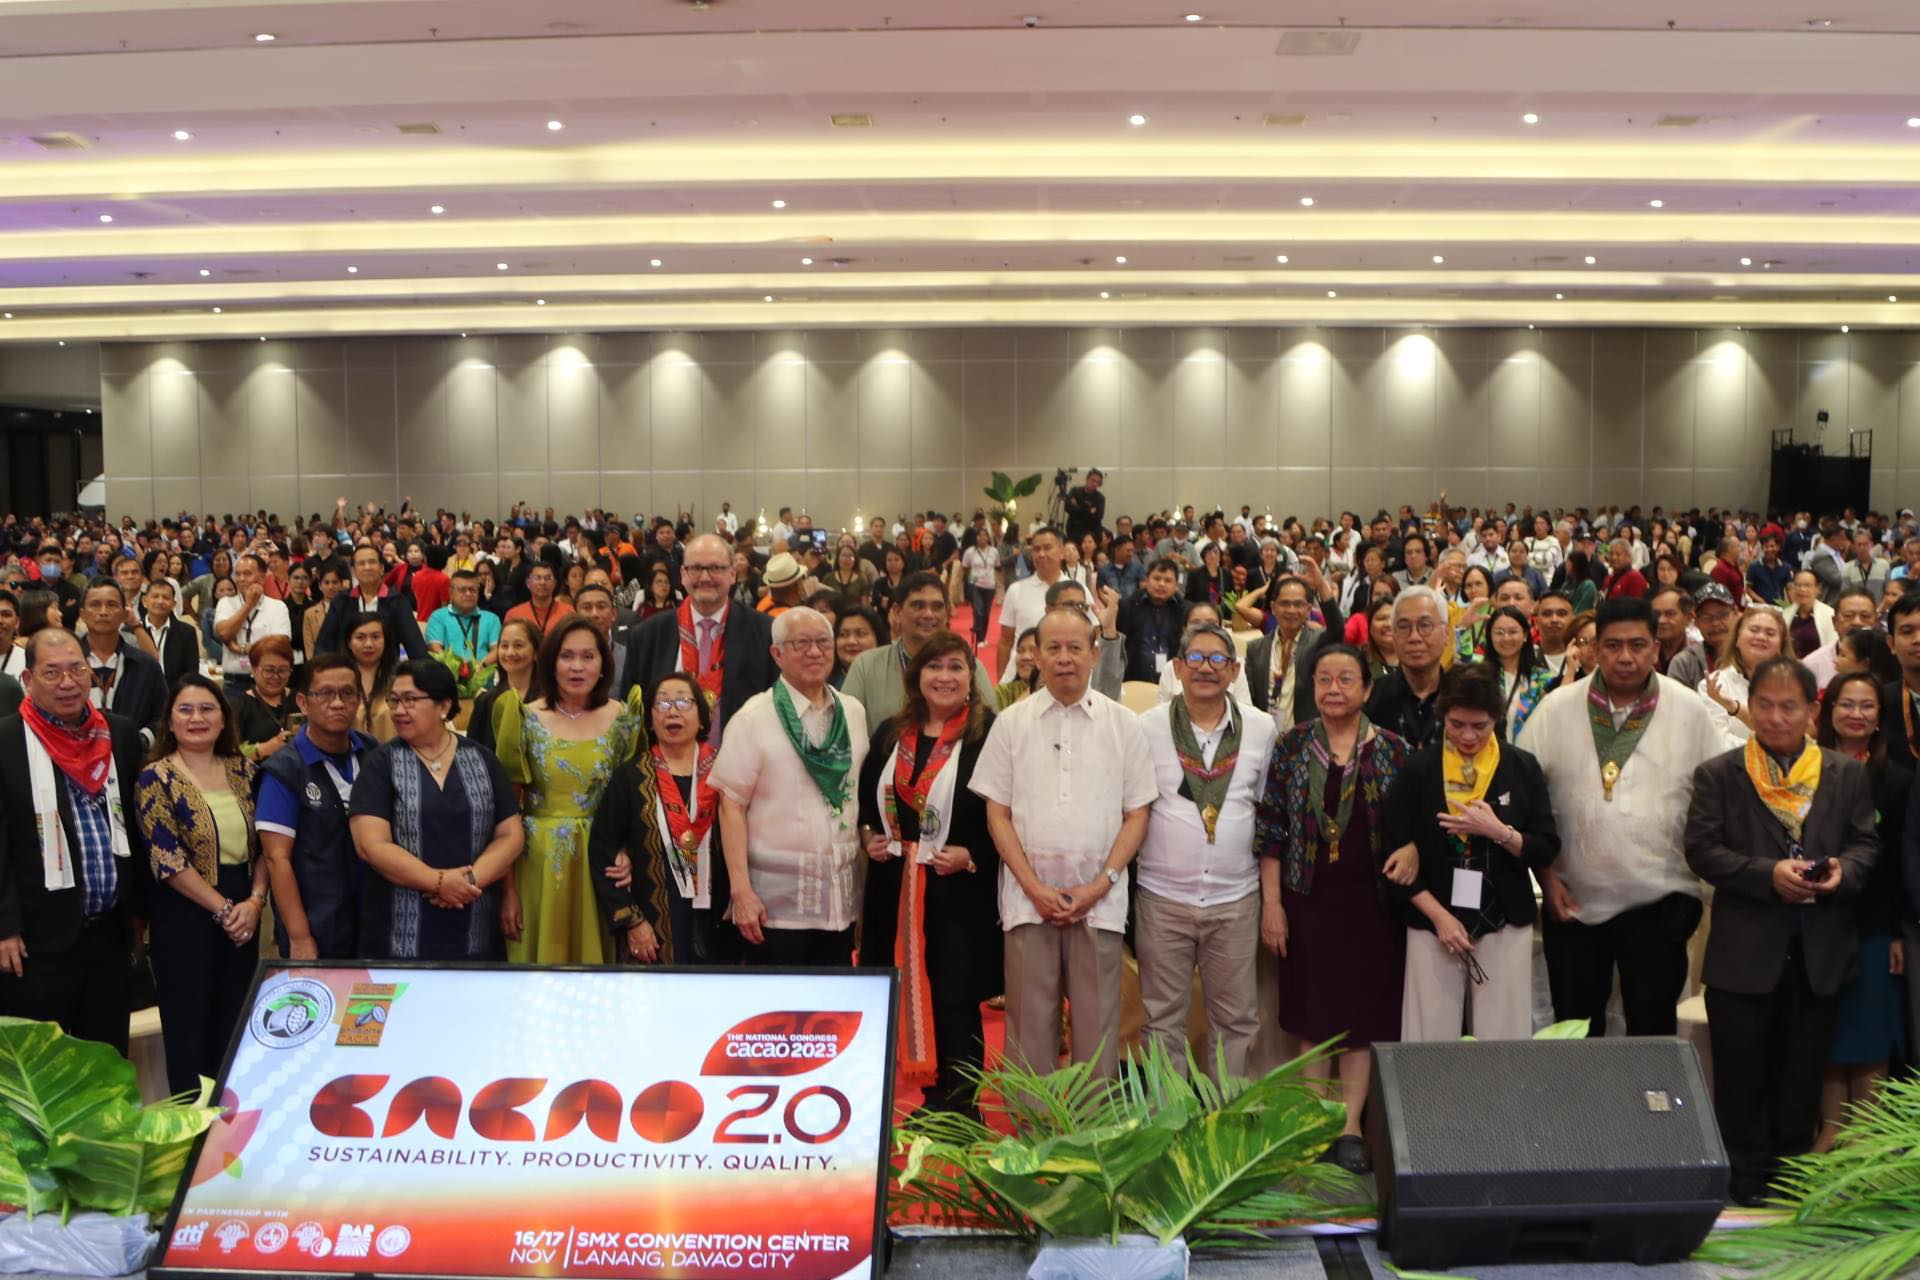 The National Cacao Congress 2023 has showcased innovative approaches for the development of the country’s cacao industry, the Department of Agriculture (DA) said on Tuesday.